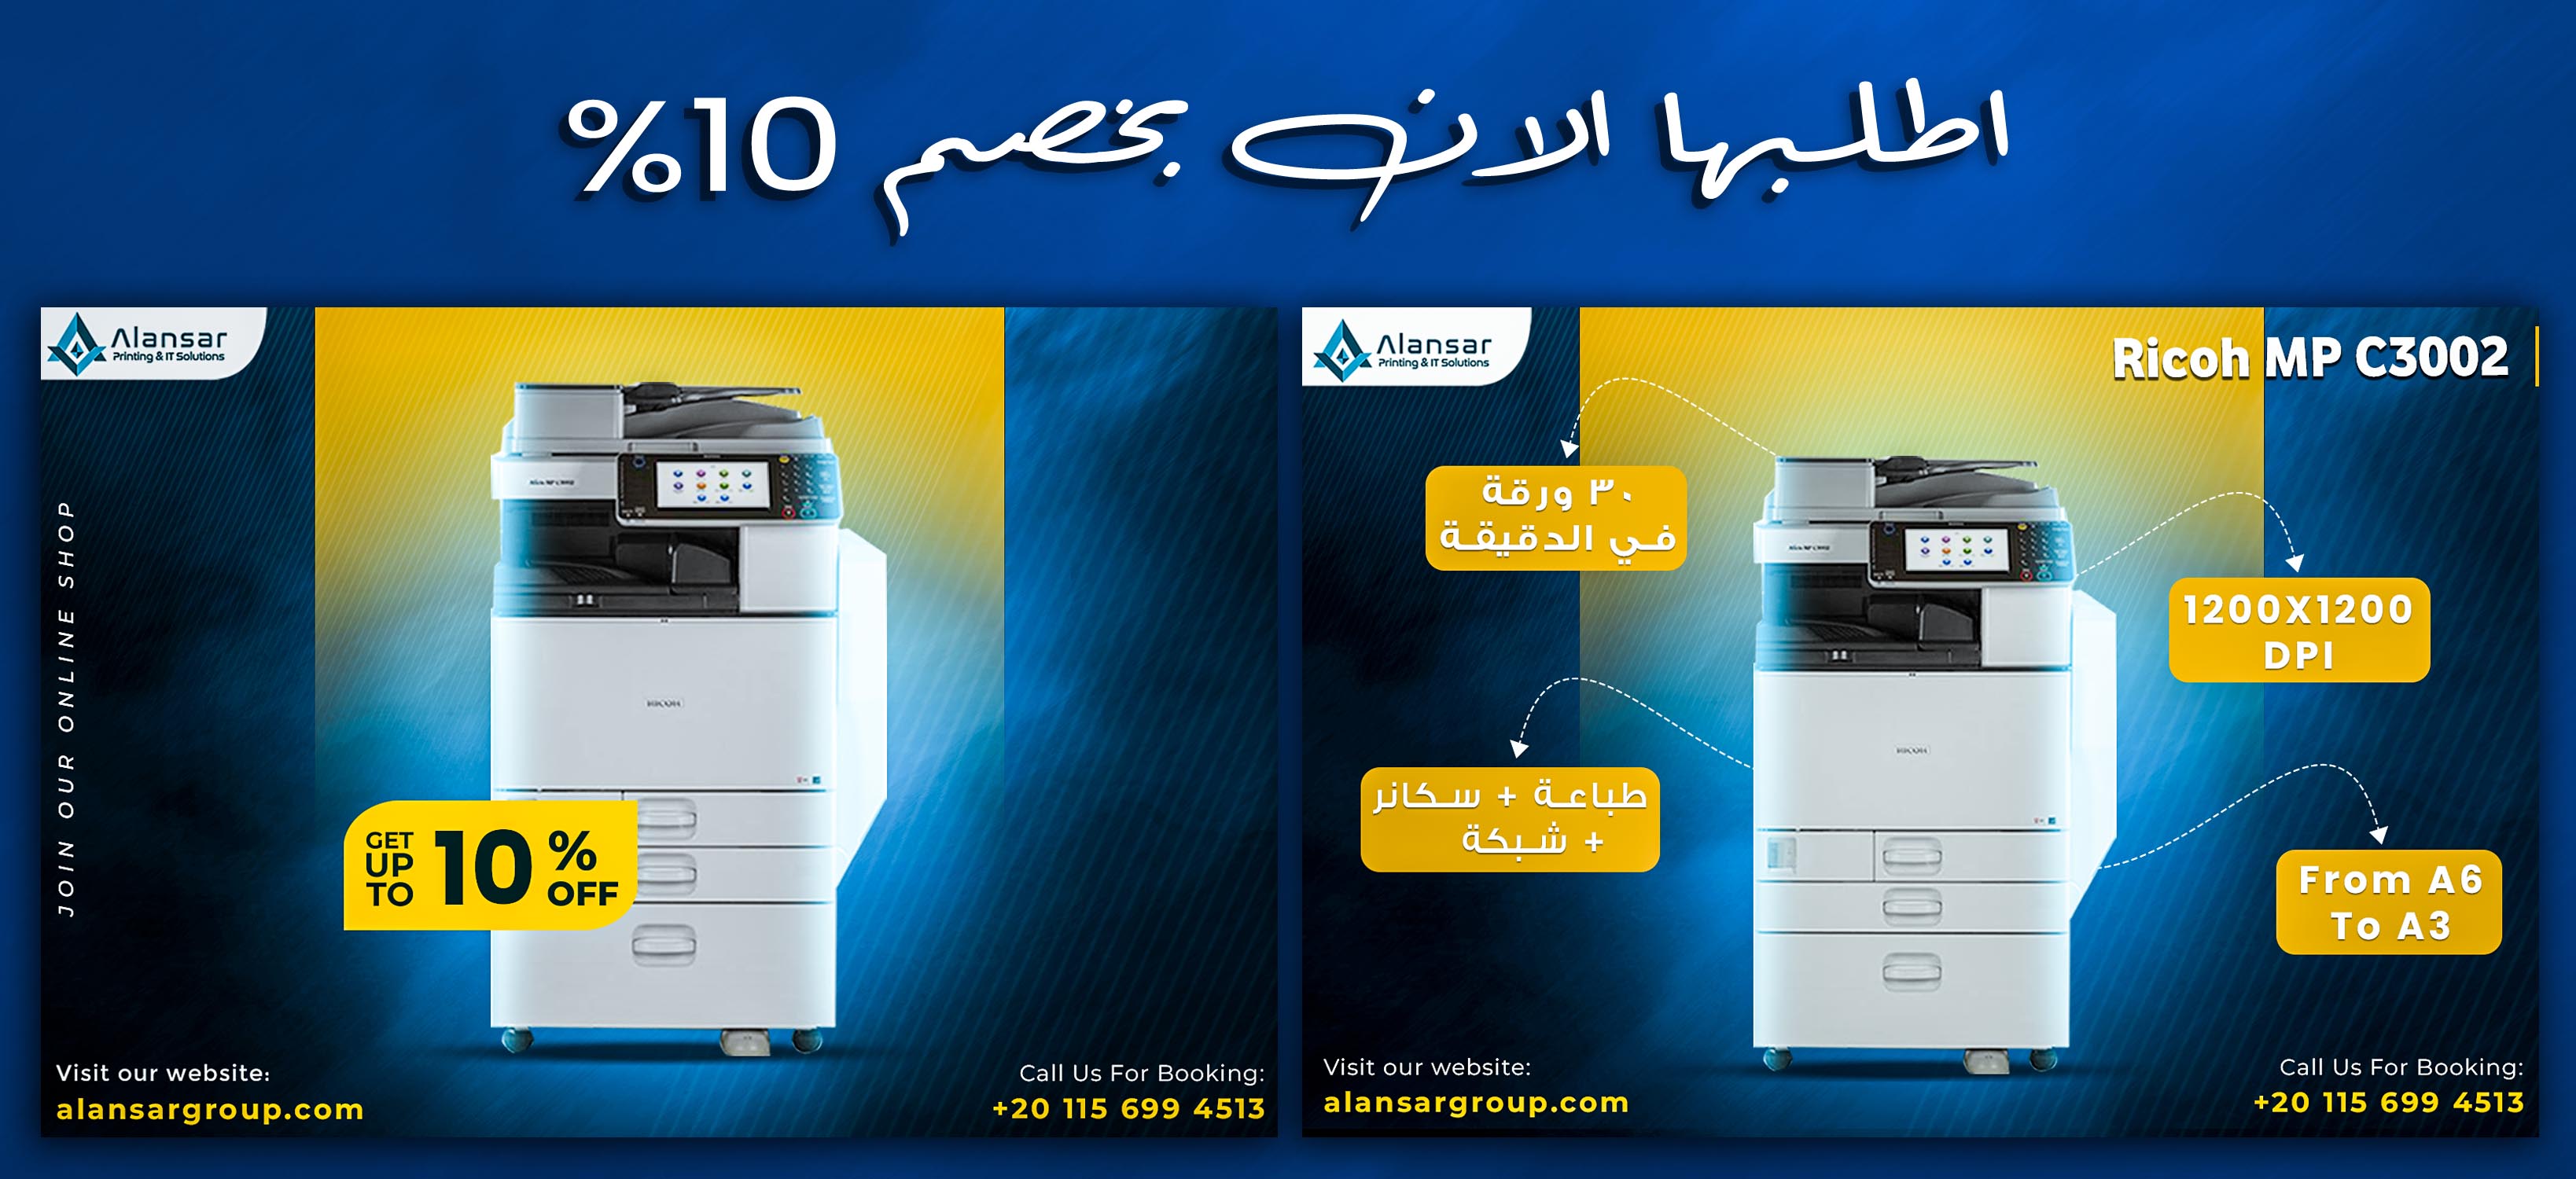 Ricoh MP C3002 is one of the best color photocopiers